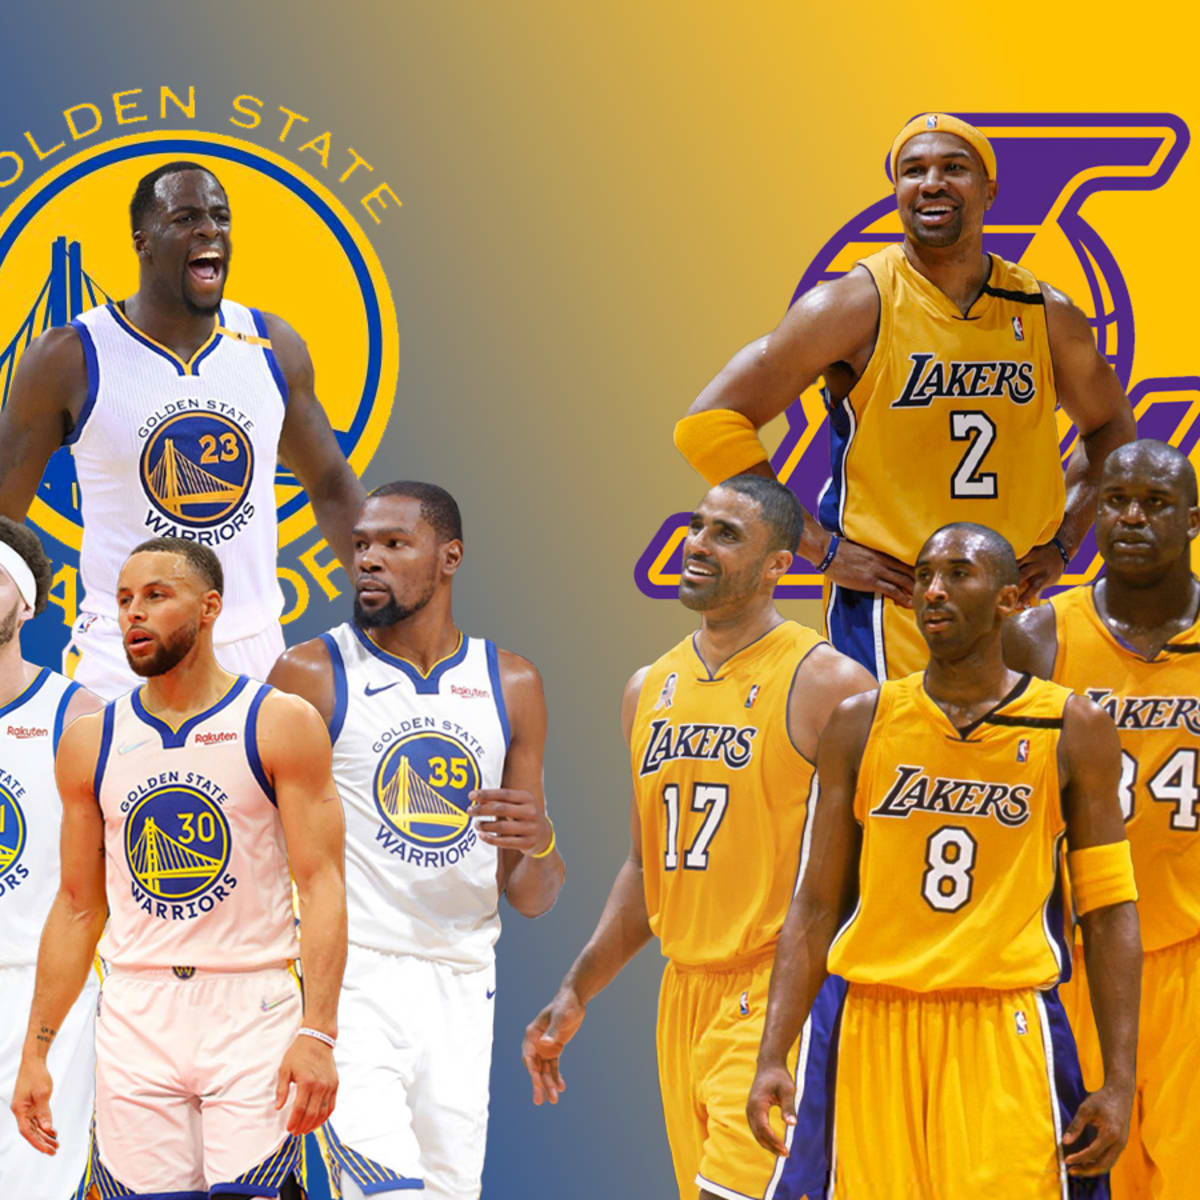 2001 Los Angeles Lakers, 2017 Warriors NBA playoffs comparison